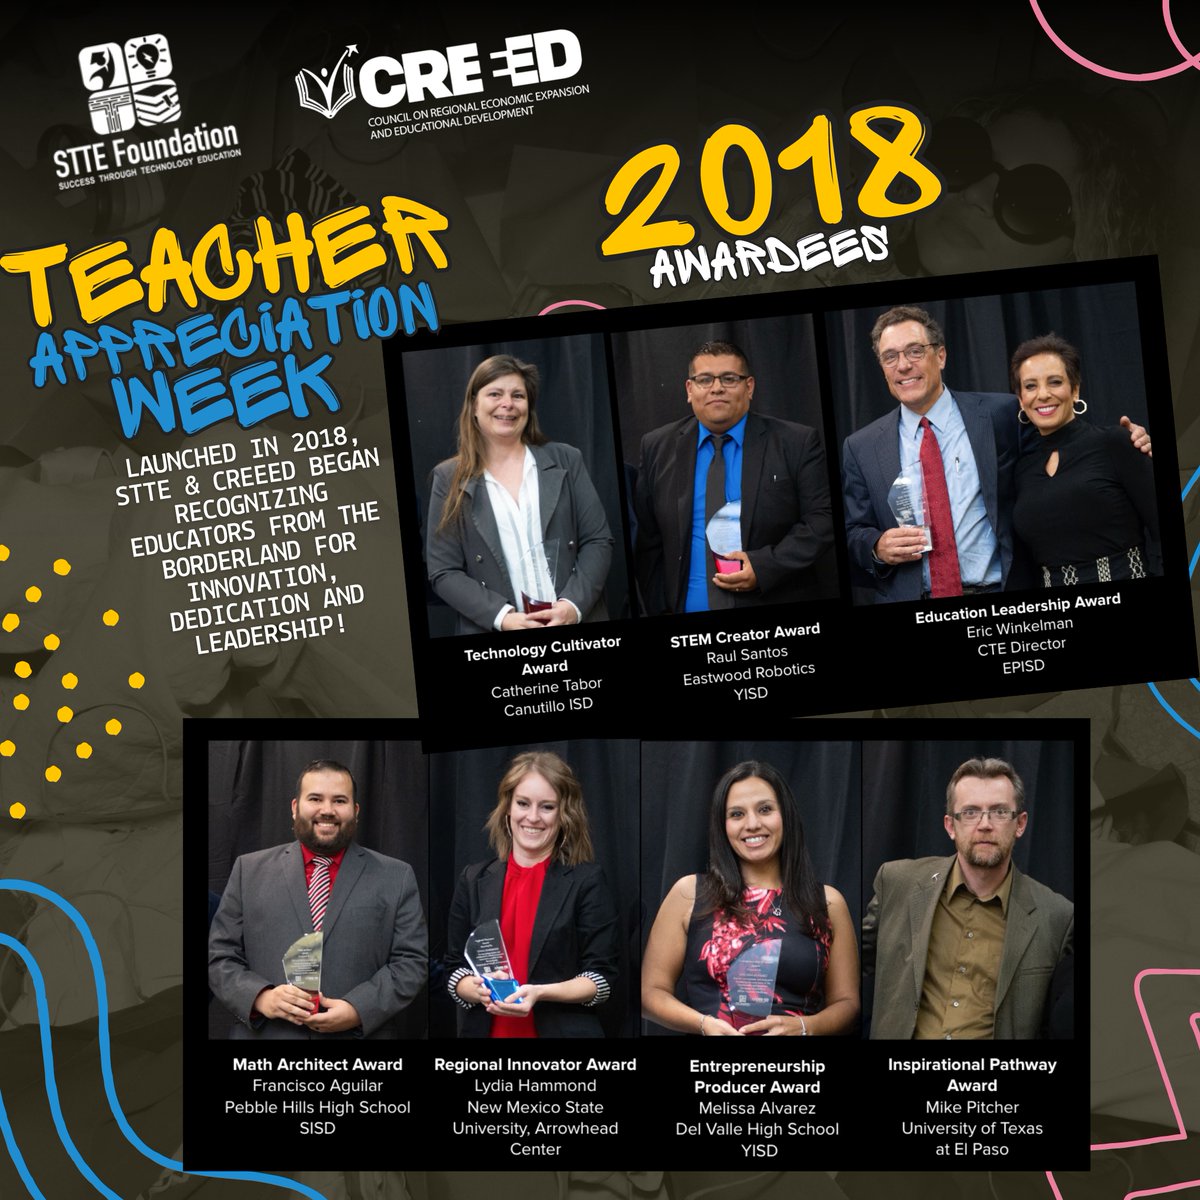 🌟 #TeacherAppreciationWeek  Flashback to when it all started in 2018! STTE & @CREEEDorg have been celebrating educators in the region. 🍎🏅
Catch a glimpse of past award winners and make sure to subscribe our newsletter for some exciting news! 
👉eepurl.com/hVG-Nr